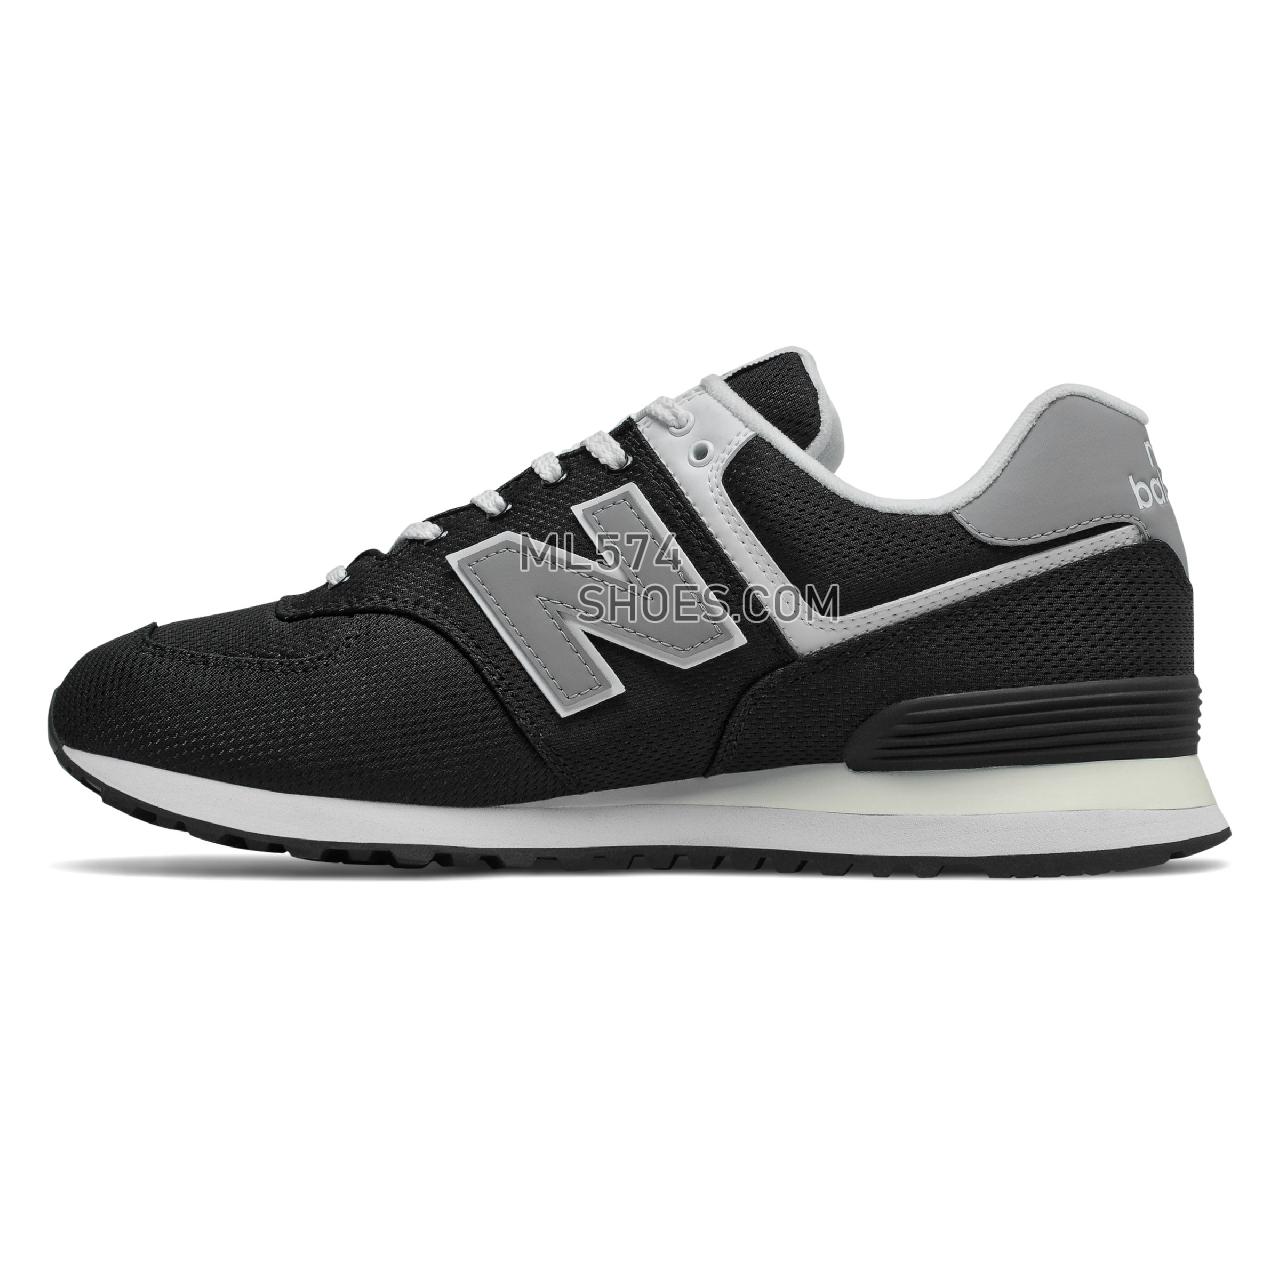 New Balance 574 - Men's Classic Sneakers - Black with Grey - ML574SCI